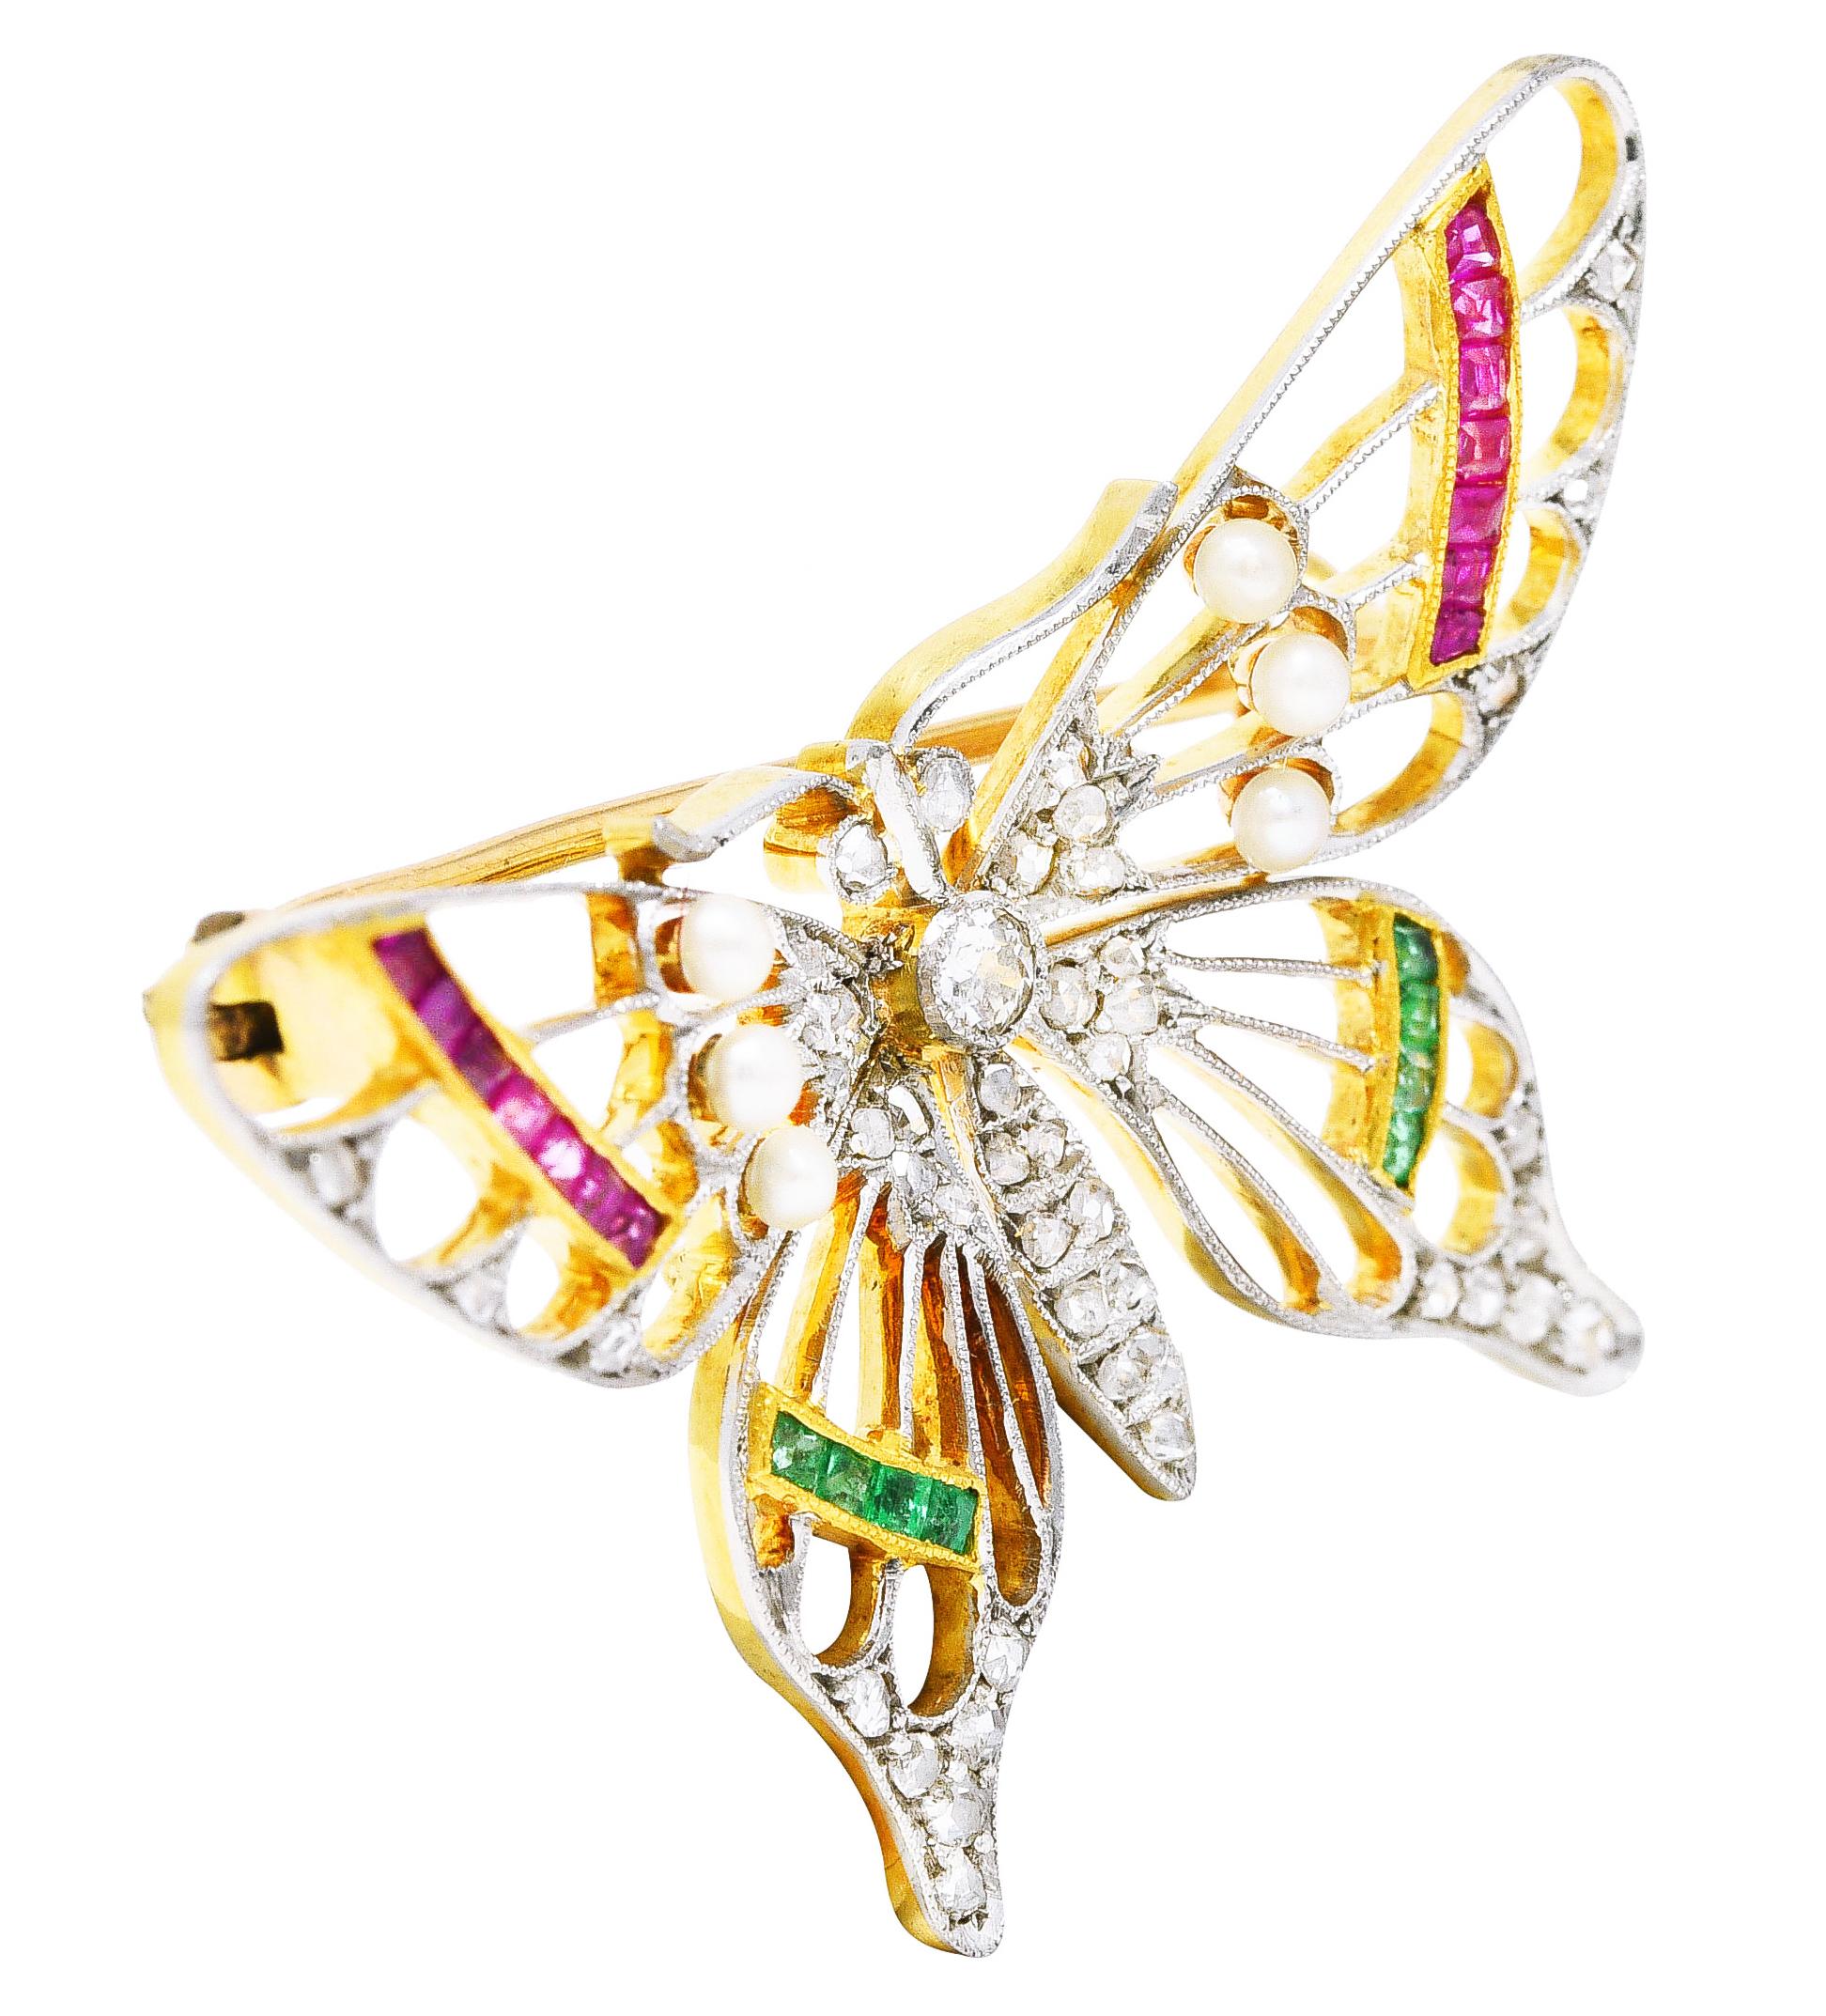 Butterfly brooch is pierced with knife edge veining throughout spread wings. With calibré cut emeralds and rubies channel set in yellow gold. Brightly colored and weighing collectively approximately 0.65 carat. Accented by 2.0 mm round pearls -